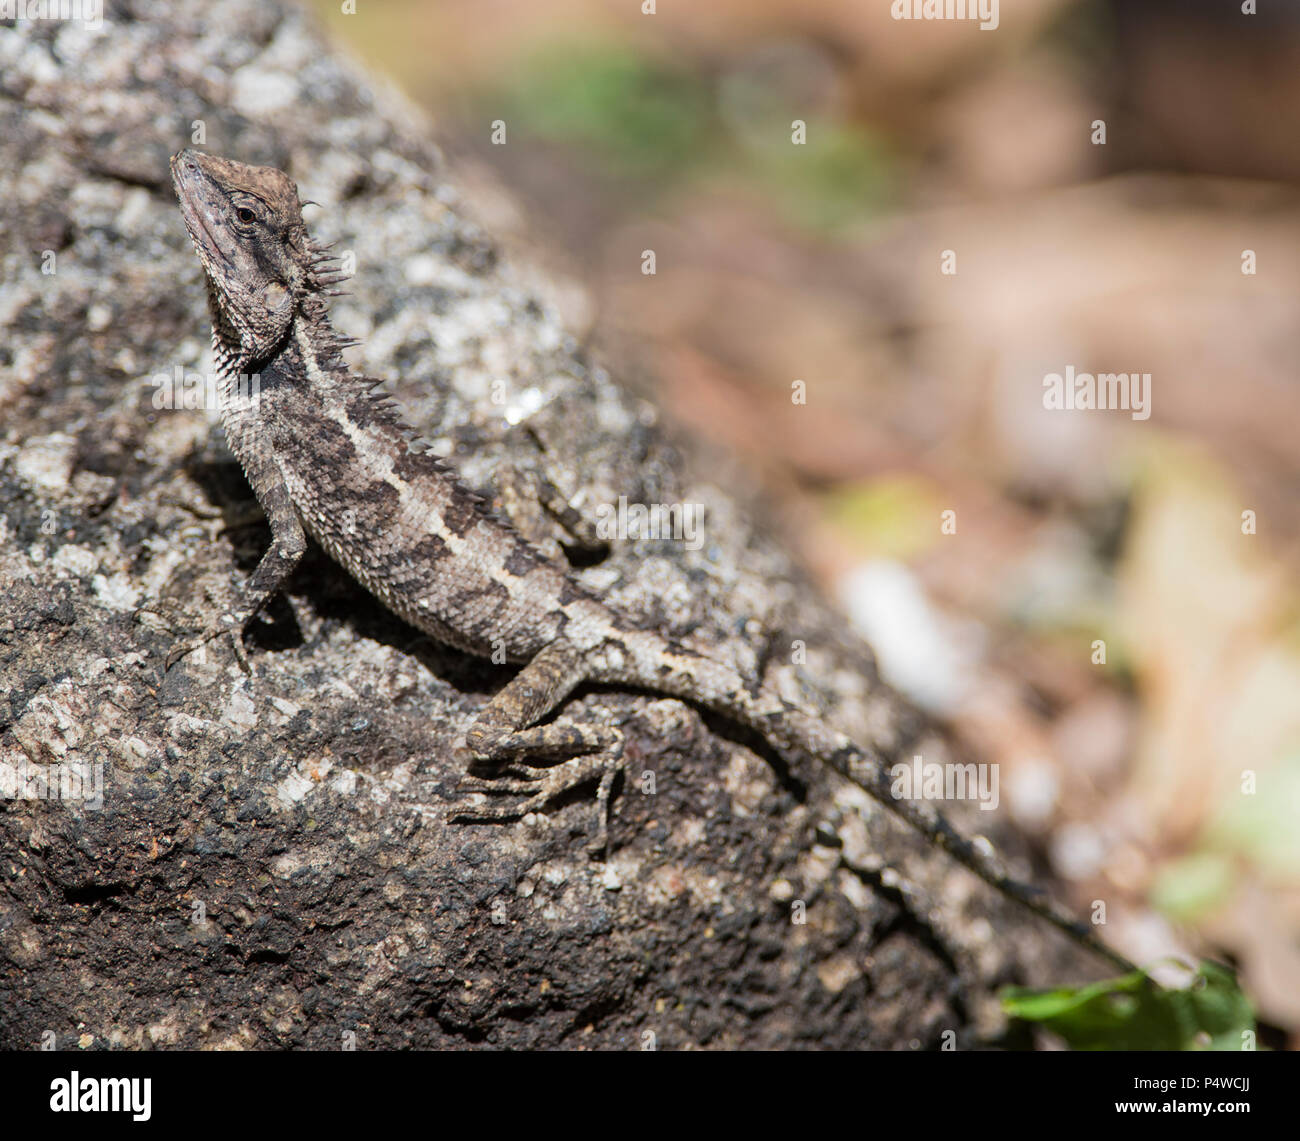 Forest Crested Lizard (Calotes emma) Krabi Thailand sat on a rock Stock Photo